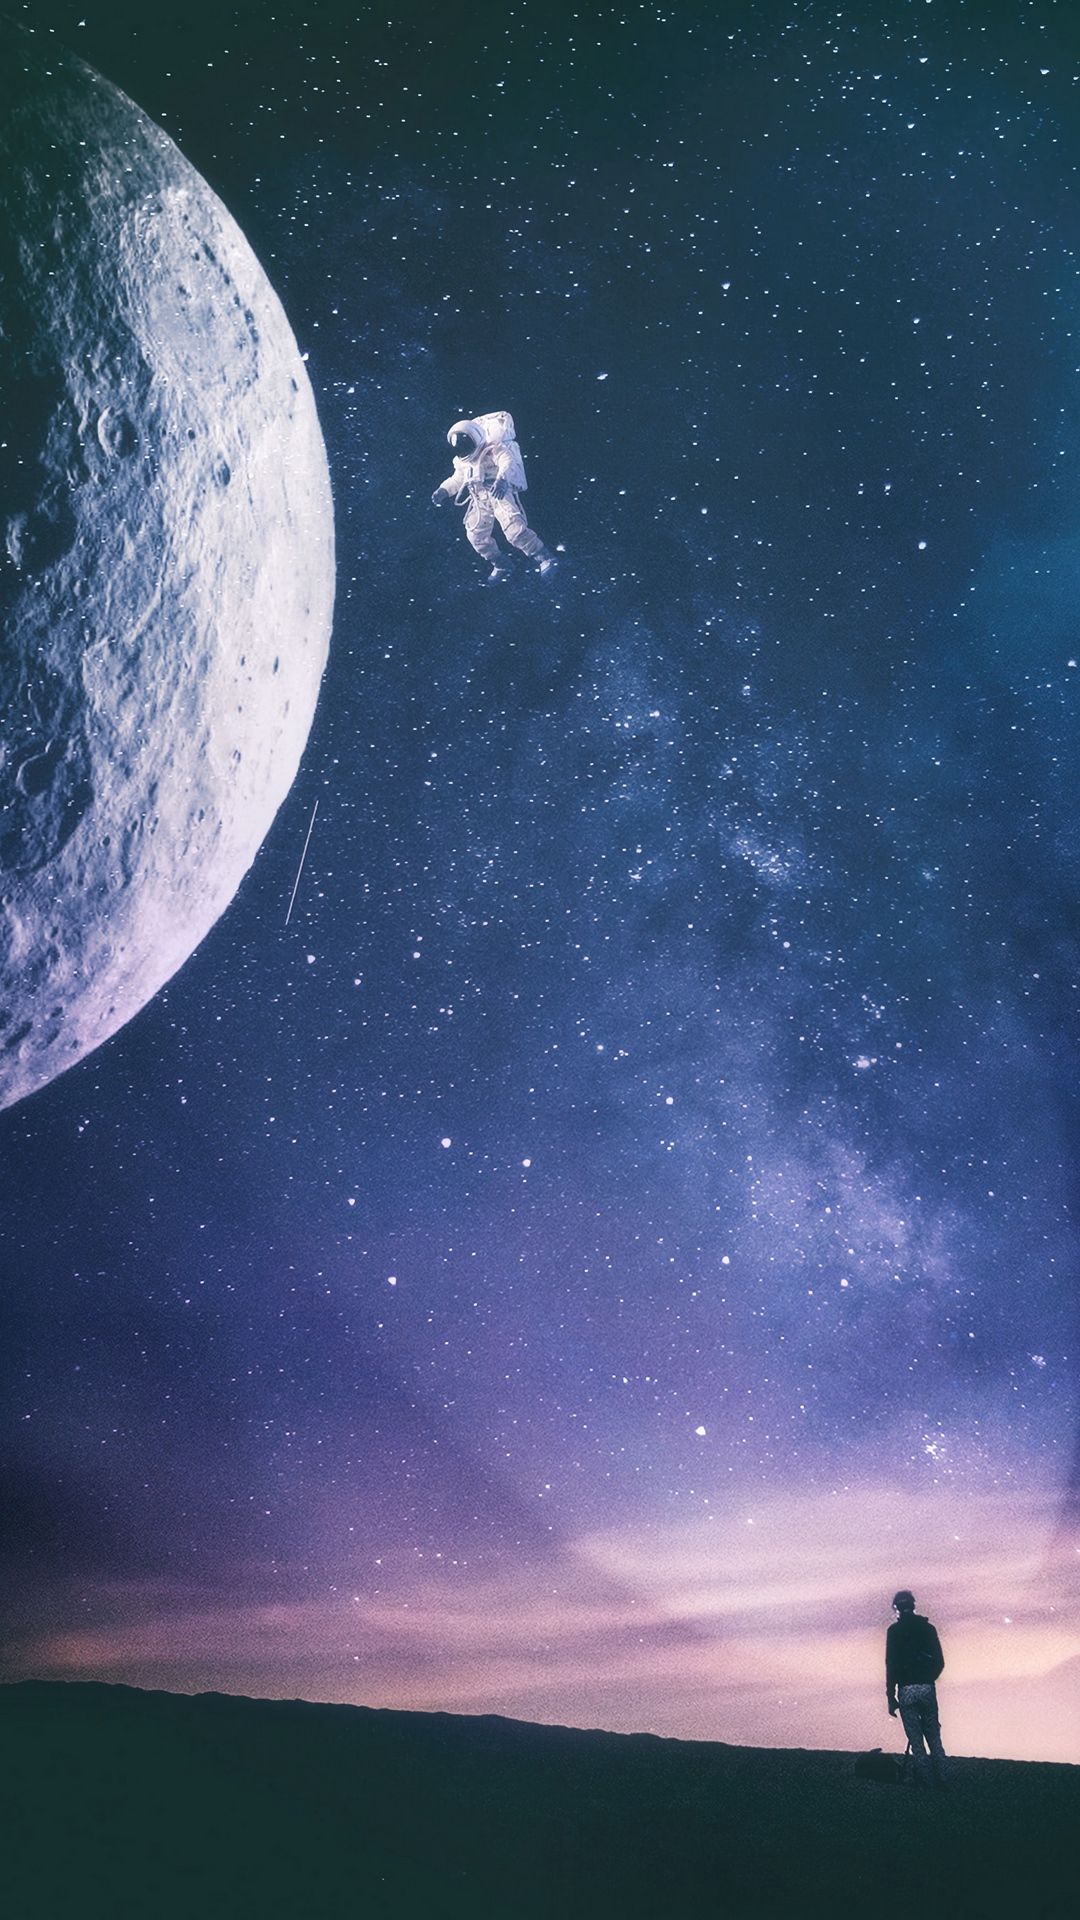 Astronaut Space Phone Wallpaper, Cool Phone Wallpaper, Wallpaper 4k Phone HD Wallpaper